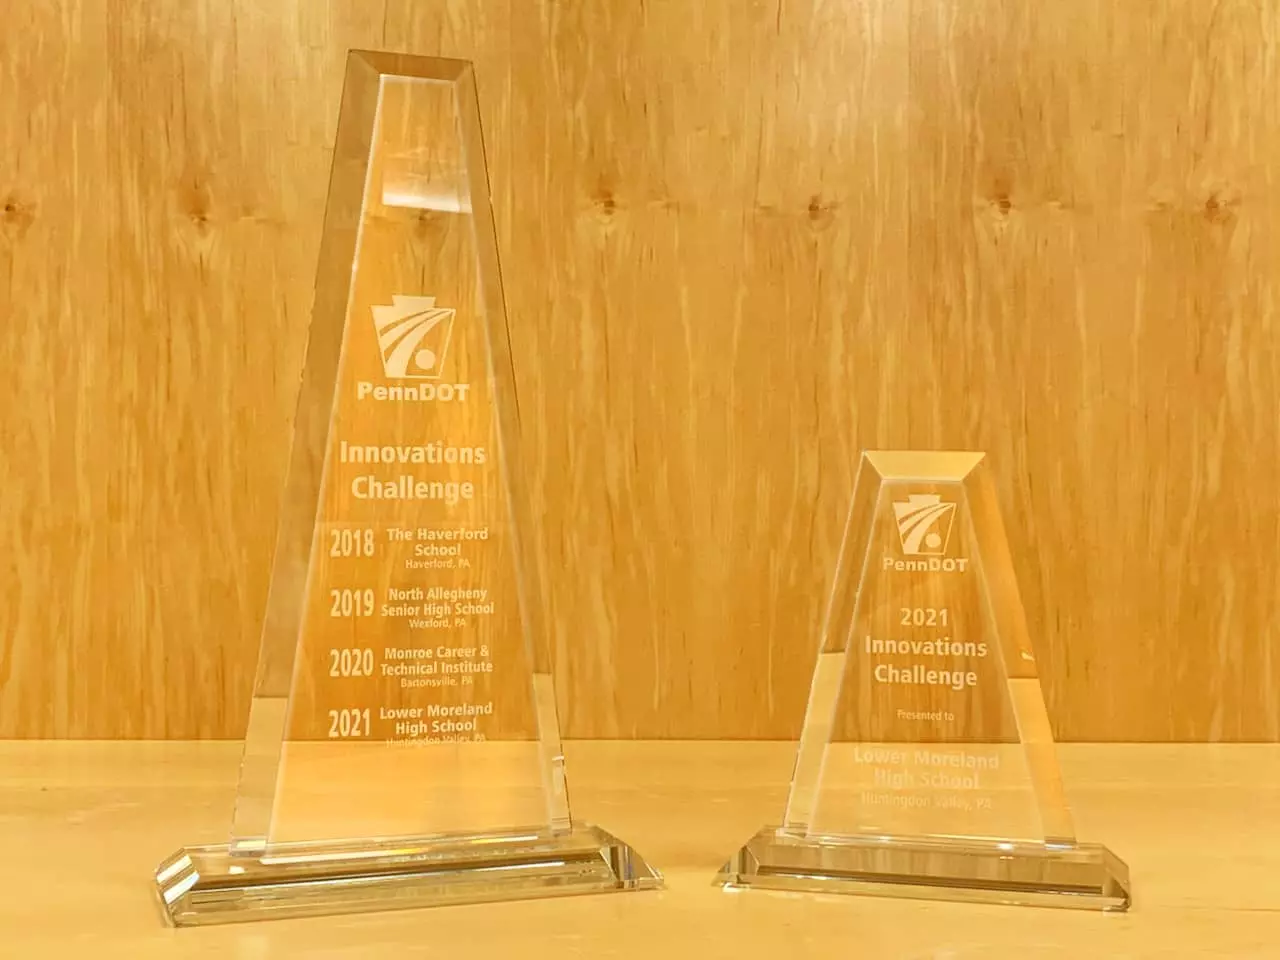 The Innovations Challenge traveling trophy showing winners from the past four years, next to the Lower Moreland High School 2021 Innovations Challenge trophy.